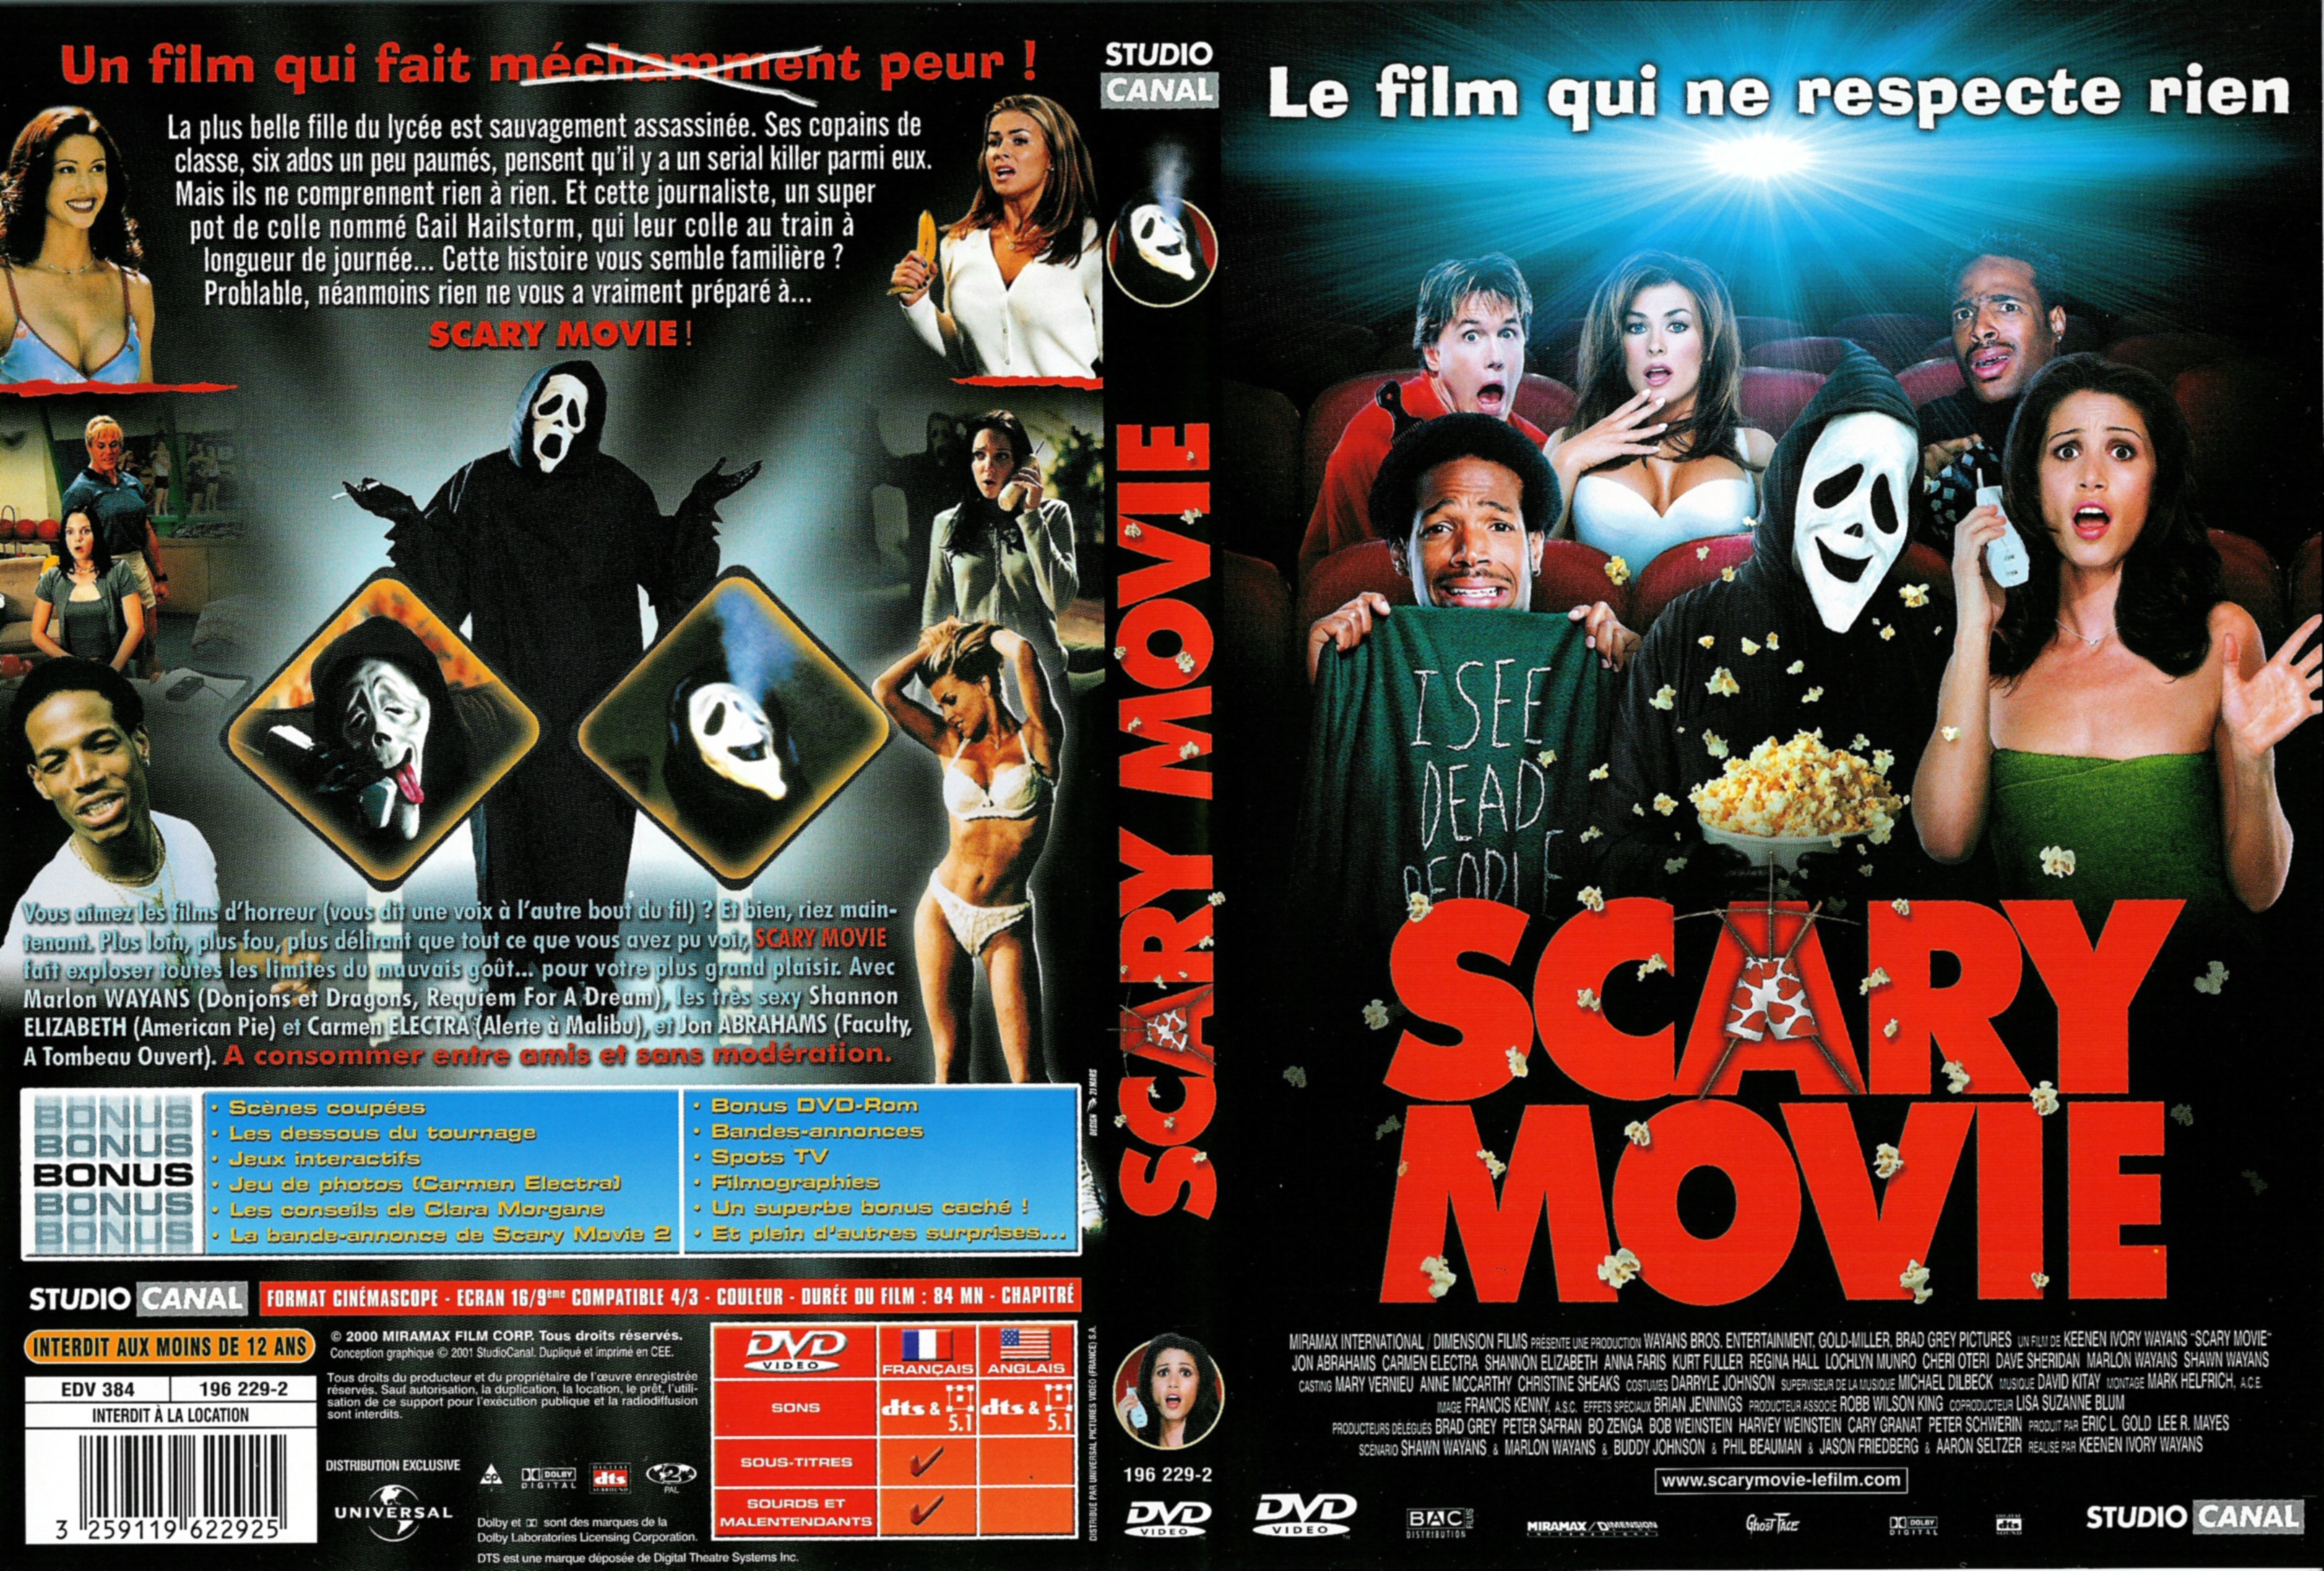 Jaquette DVD Scary movie v2